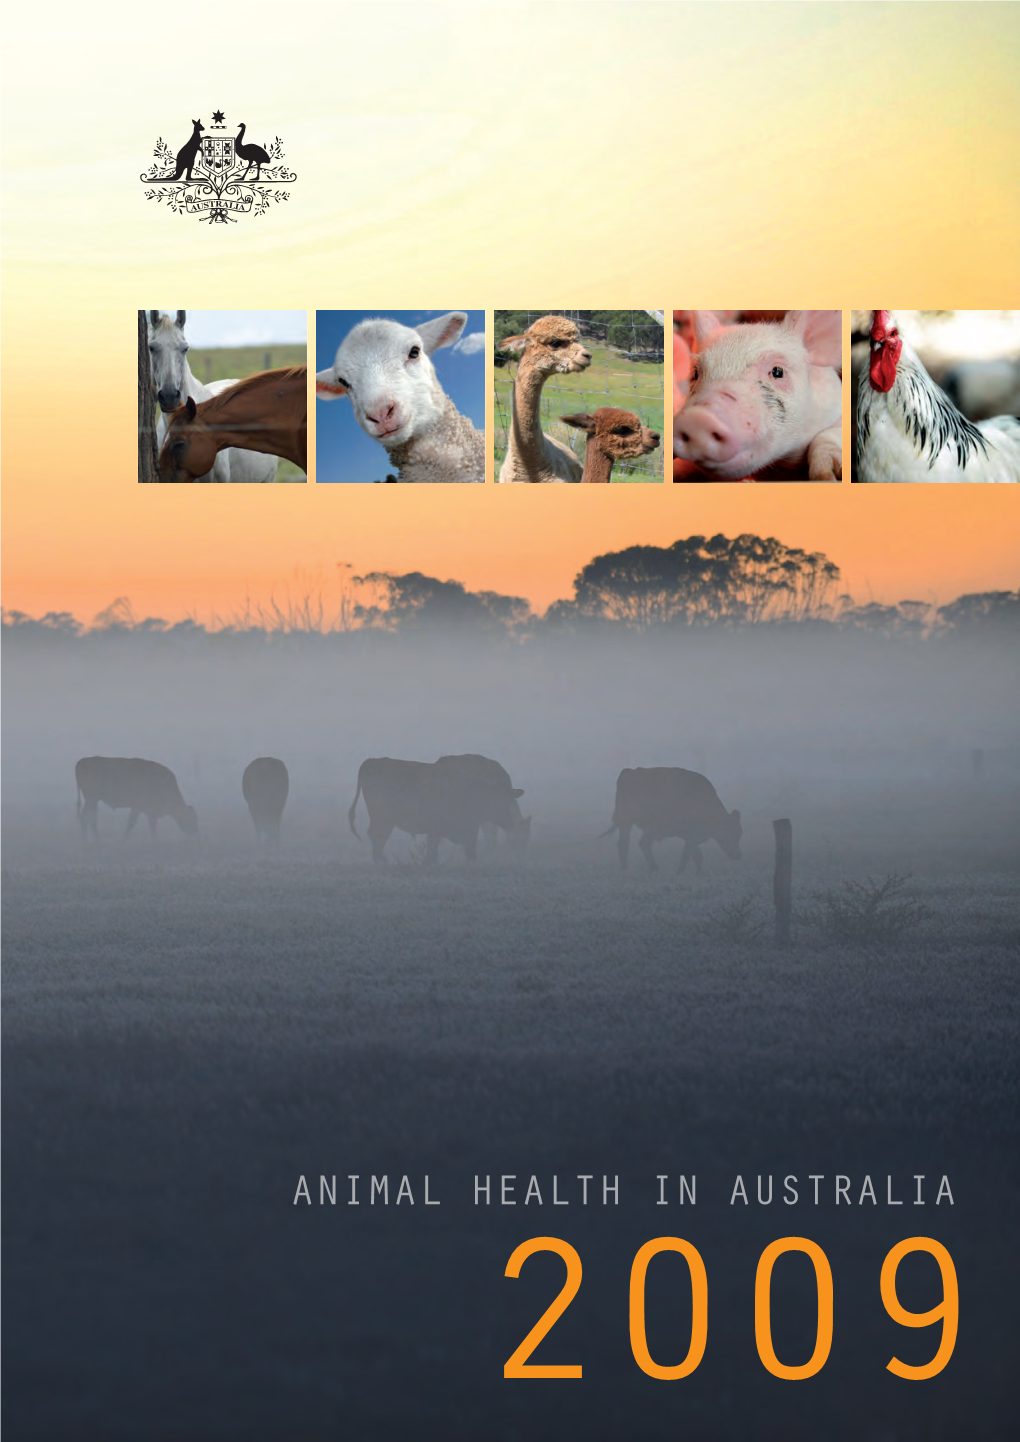 ANIMAL HEALTH in AUSTRALIA 2009 ANIMAL HEALTH in AUSTRALIA 2009 Copyright and Trademarks Use of Materials and Information